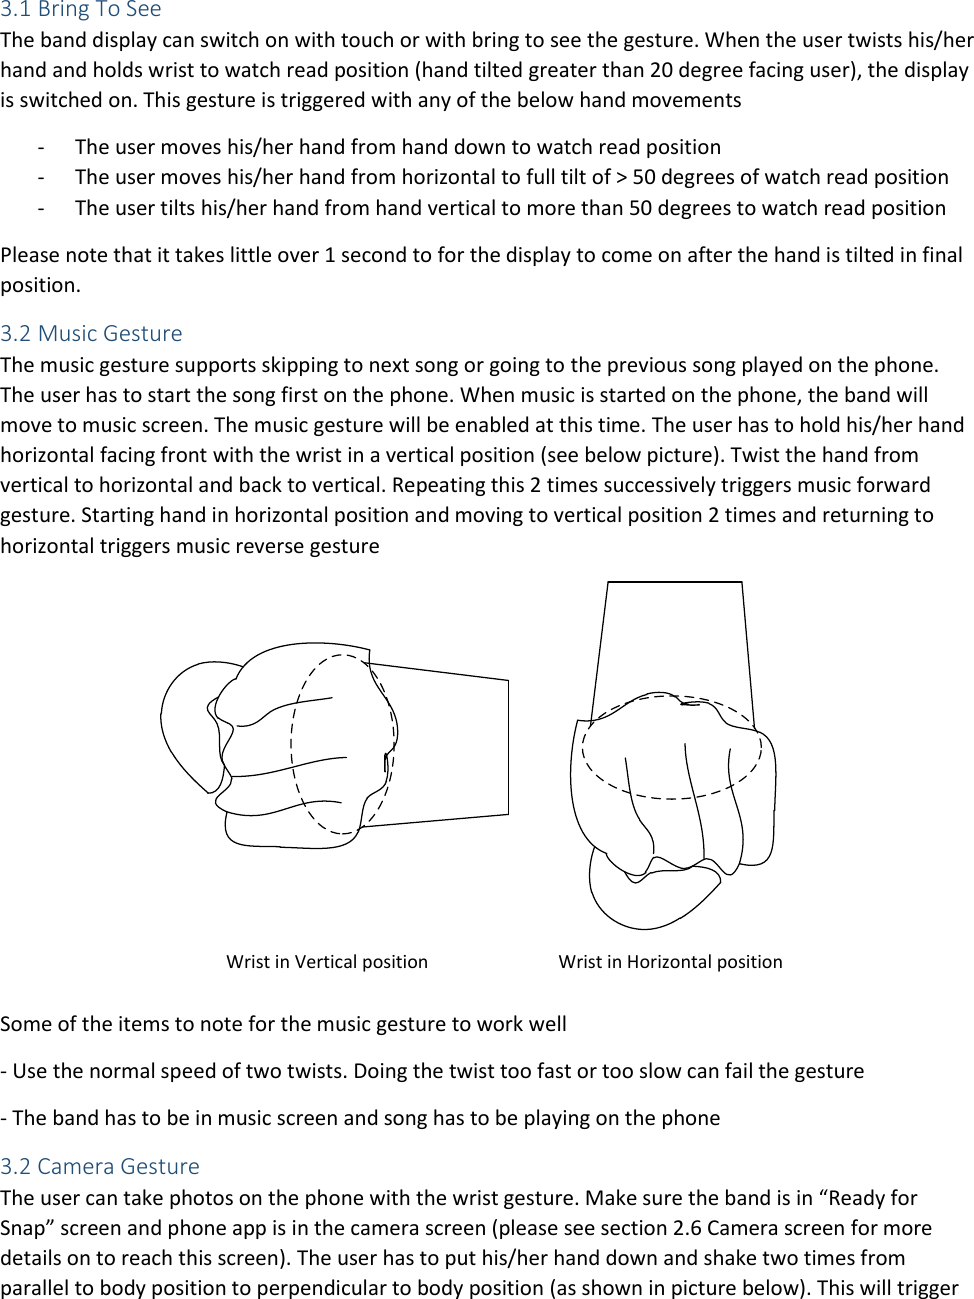 3.1 Bring To See The band display can switch on with touch or with bring to see the gesture. When the user twists his/her hand and holds wrist to watch read position (hand tilted greater than 20 degree facing user), the display is switched on. This gesture is triggered with any of the below hand movements - The user moves his/her hand from hand down to watch read position - The user moves his/her hand from horizontal to full tilt of &gt; 50 degrees of watch read position - The user tilts his/her hand from hand vertical to more than 50 degrees to watch read position Please note that it takes little over 1 second to for the display to come on after the hand is tilted in final position.  3.2 Music Gesture The music gesture supports skipping to next song or going to the previous song played on the phone. The user has to start the song first on the phone. When music is started on the phone, the band will move to music screen. The music gesture will be enabled at this time. The user has to hold his/her hand horizontal facing front with the wrist in a vertical position (see below picture). Twist the hand from vertical to horizontal and back to vertical. Repeating this 2 times successively triggers music forward gesture. Starting hand in horizontal position and moving to vertical position 2 times and returning to horizontal triggers music reverse gesture Wrist in Vertical position Wrist in Horizontal position Some of the items to note for the music gesture to work well  - Use the normal speed of two twists. Doing the twist too fast or too slow can fail the gesture - The band has to be in music screen and song has to be playing on the phone 3.2 Camera Gesture The user can take photos on the phone with the wrist gesture. Make sure the band is in “Ready for Snap” screen and phone app is in the camera screen (please see section 2.6 Camera screen for more details on to reach this screen). The user has to put his/her hand down and shake two times from parallel to body position to perpendicular to body position (as shown in picture below). This will trigger 